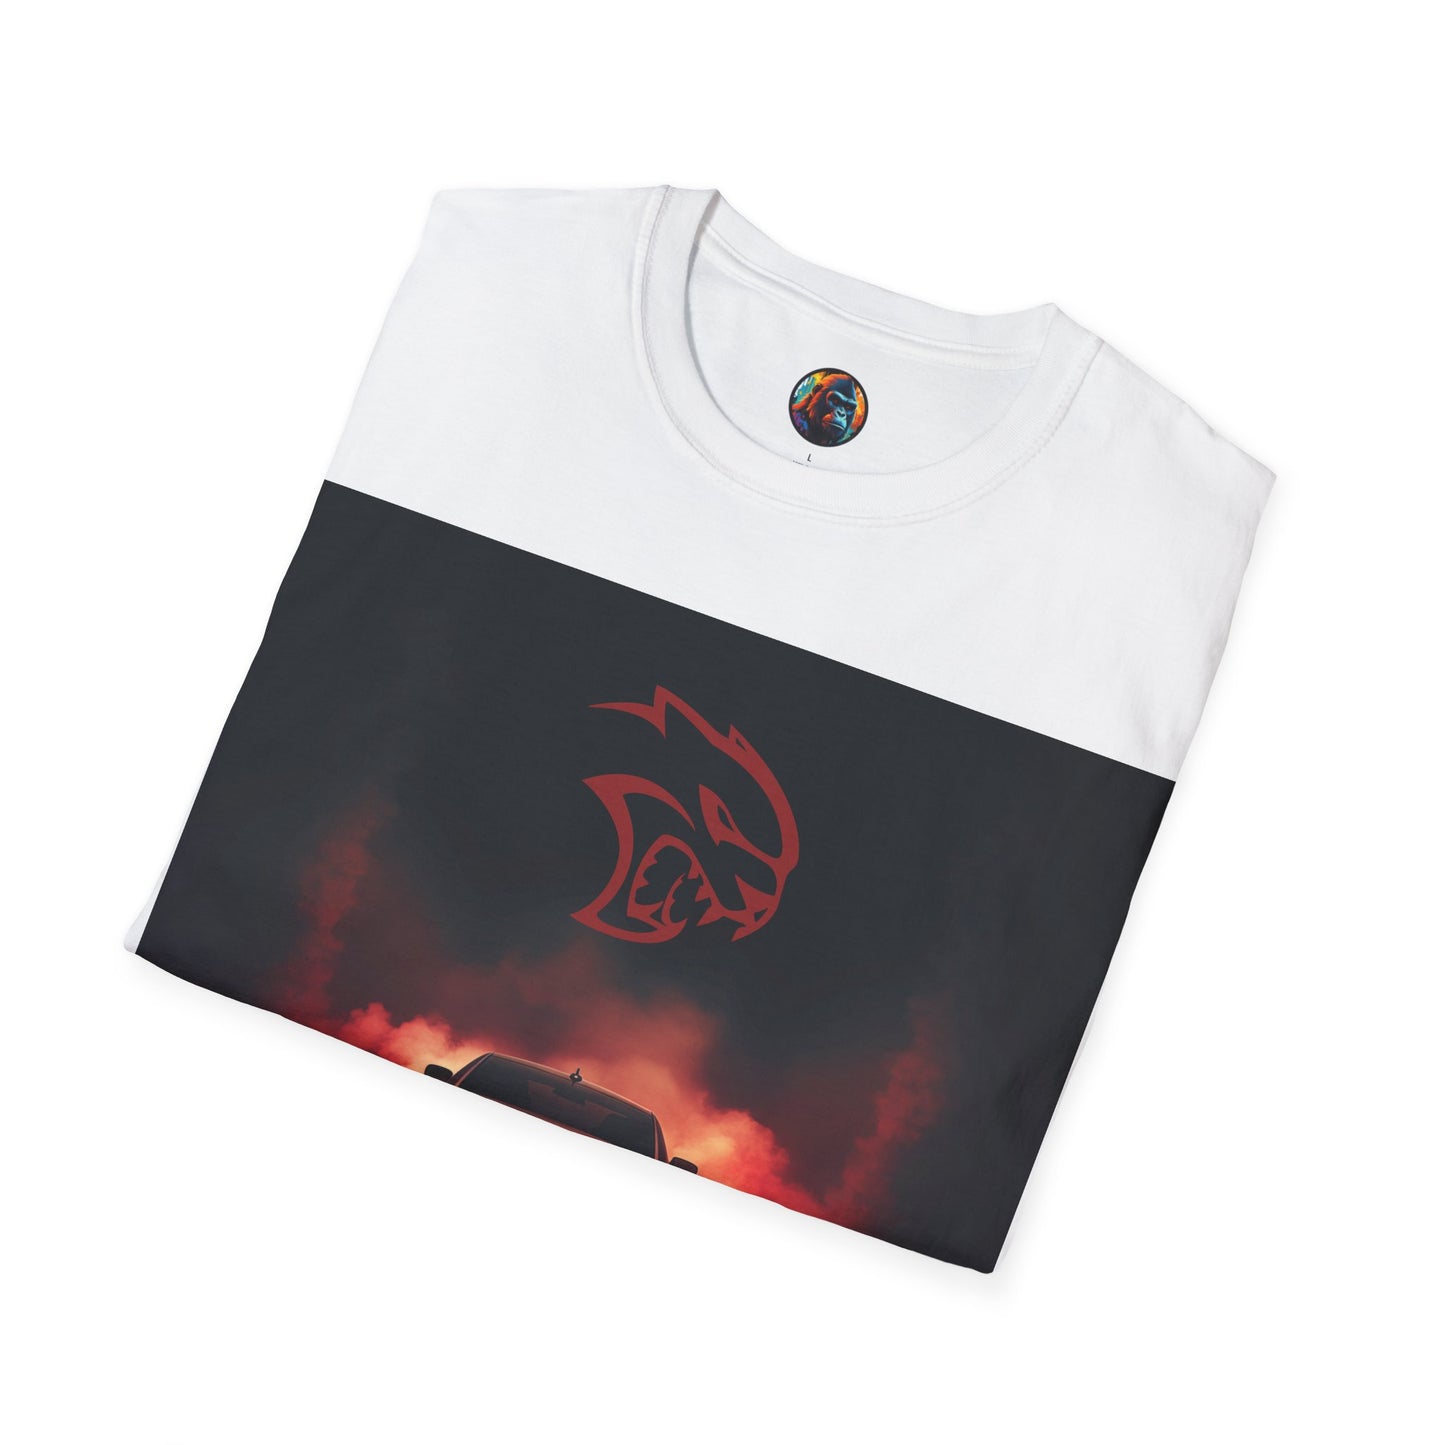 Dodge Charger Hellcat Up In Smoke T-Shirt